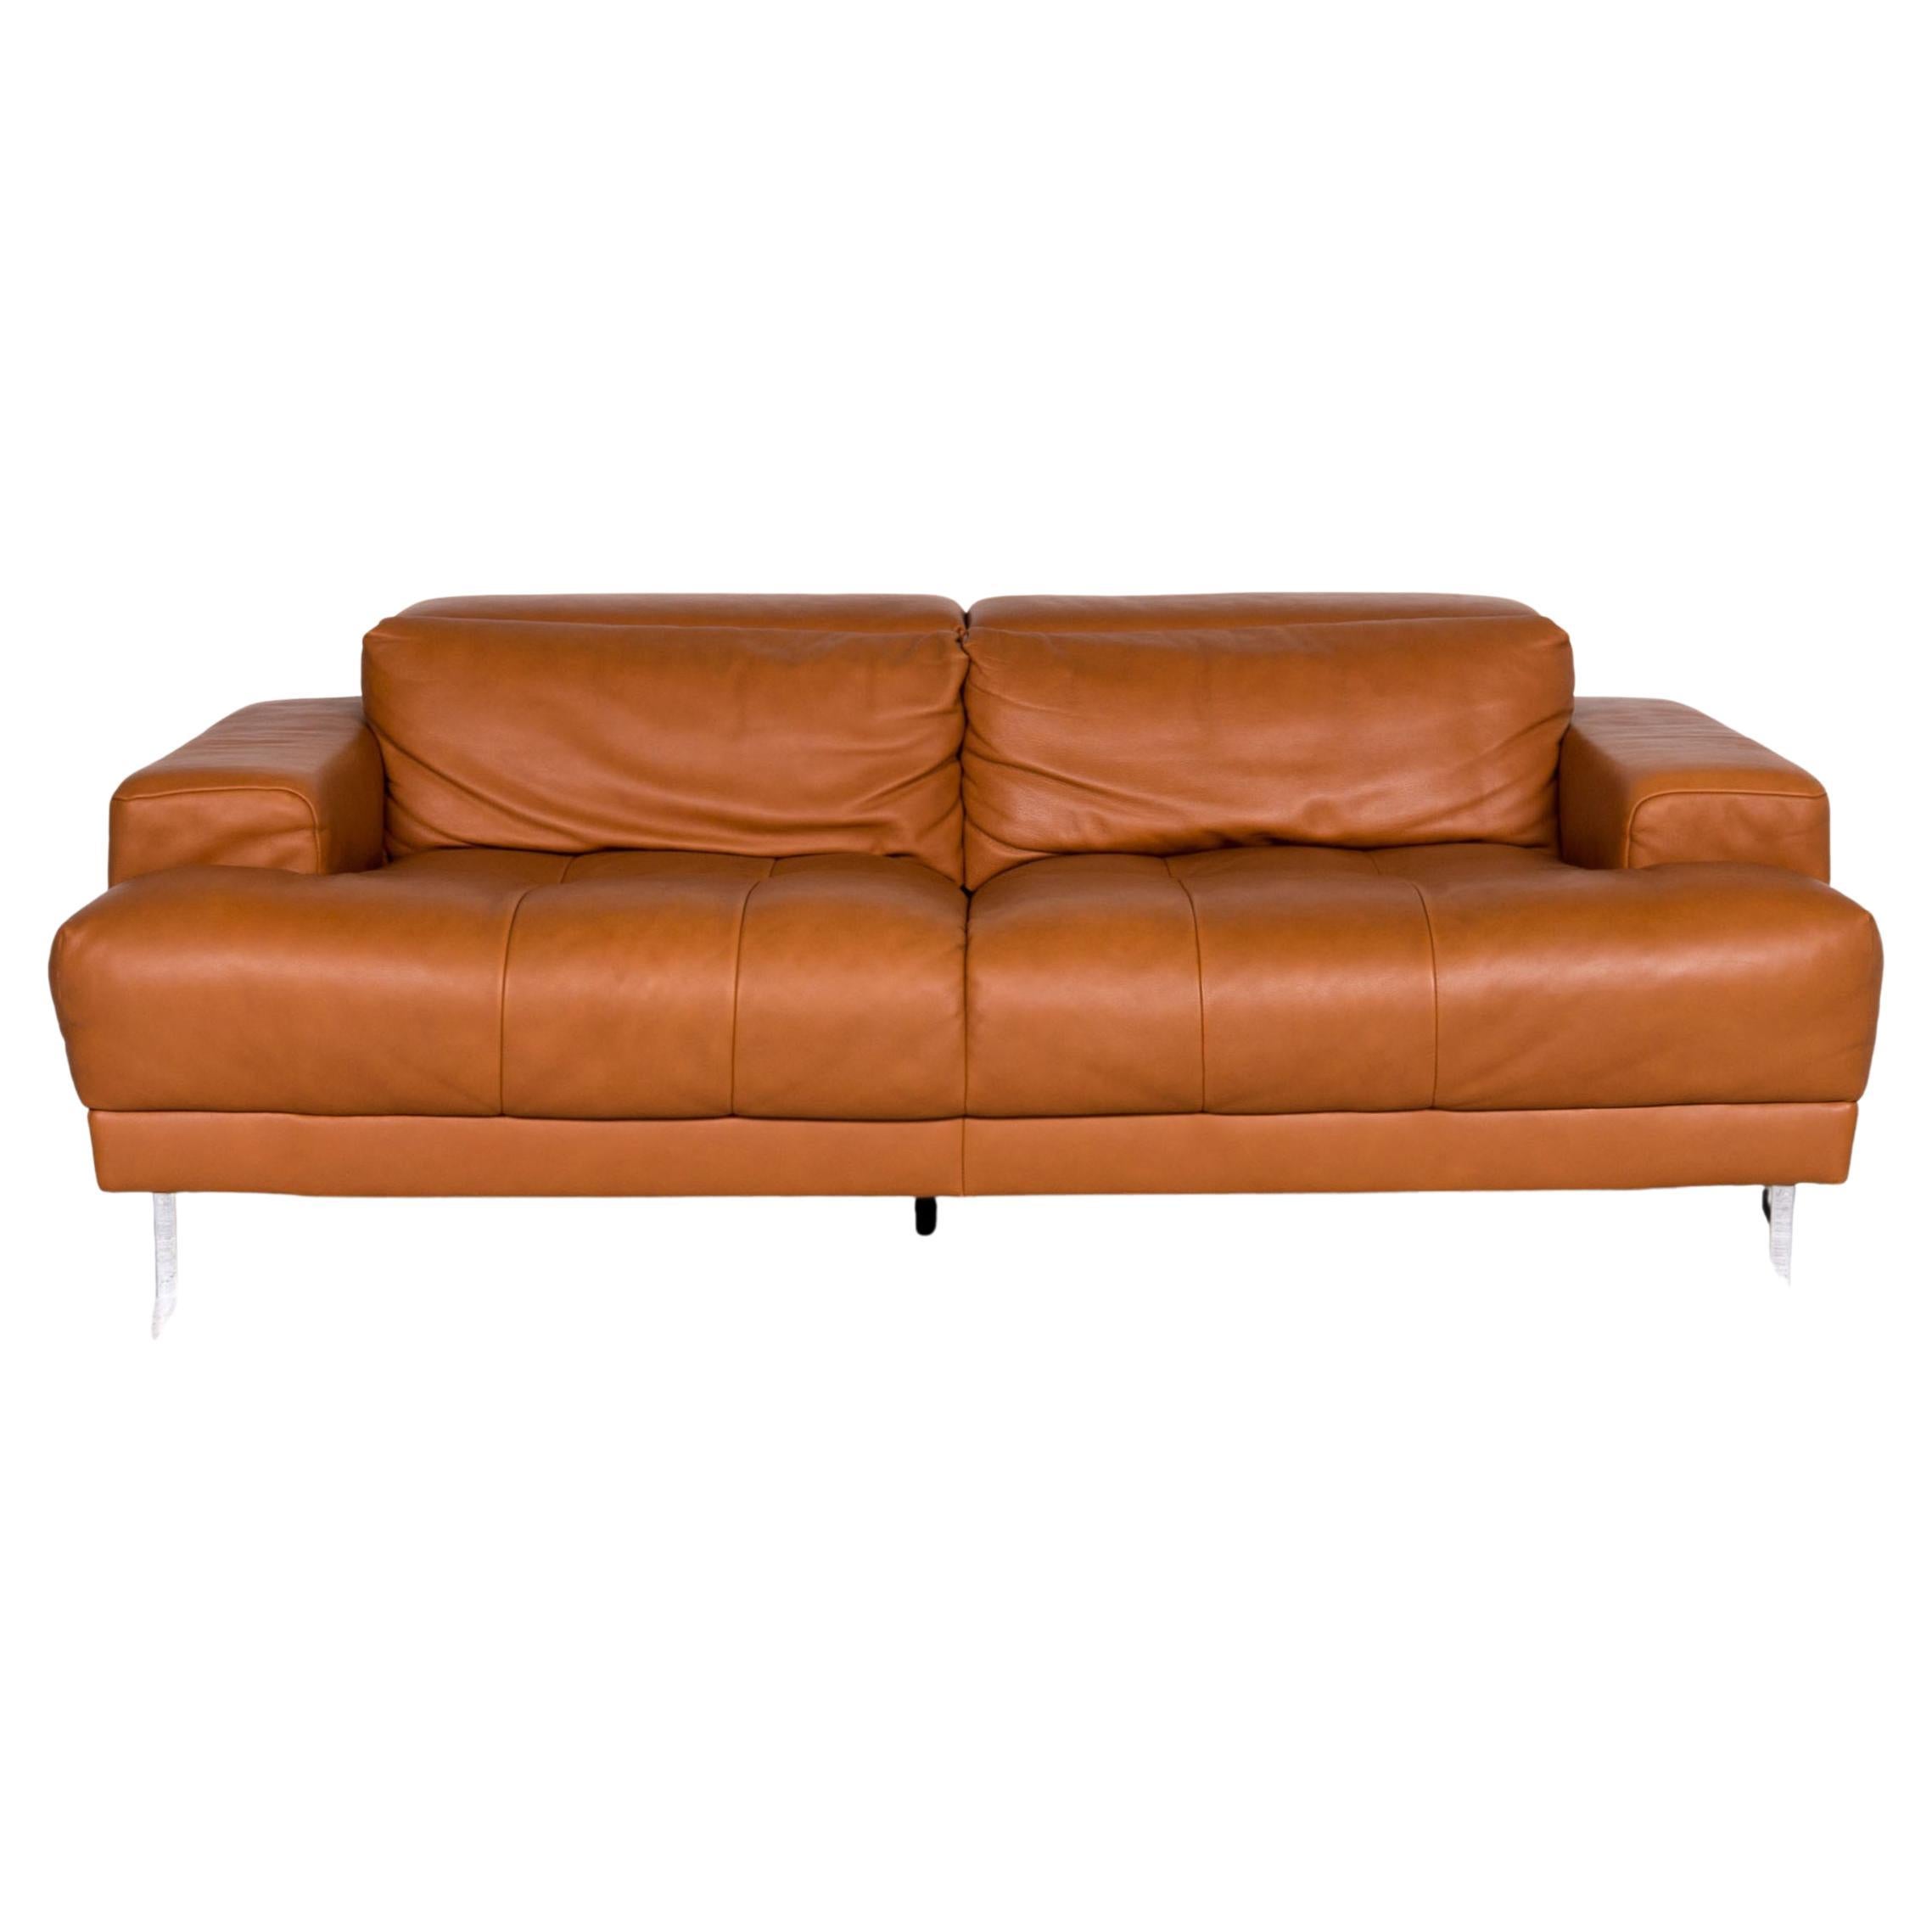 Ewald Schillig Leather Sofa Brown Cognac Three-Seater Couch For Sale